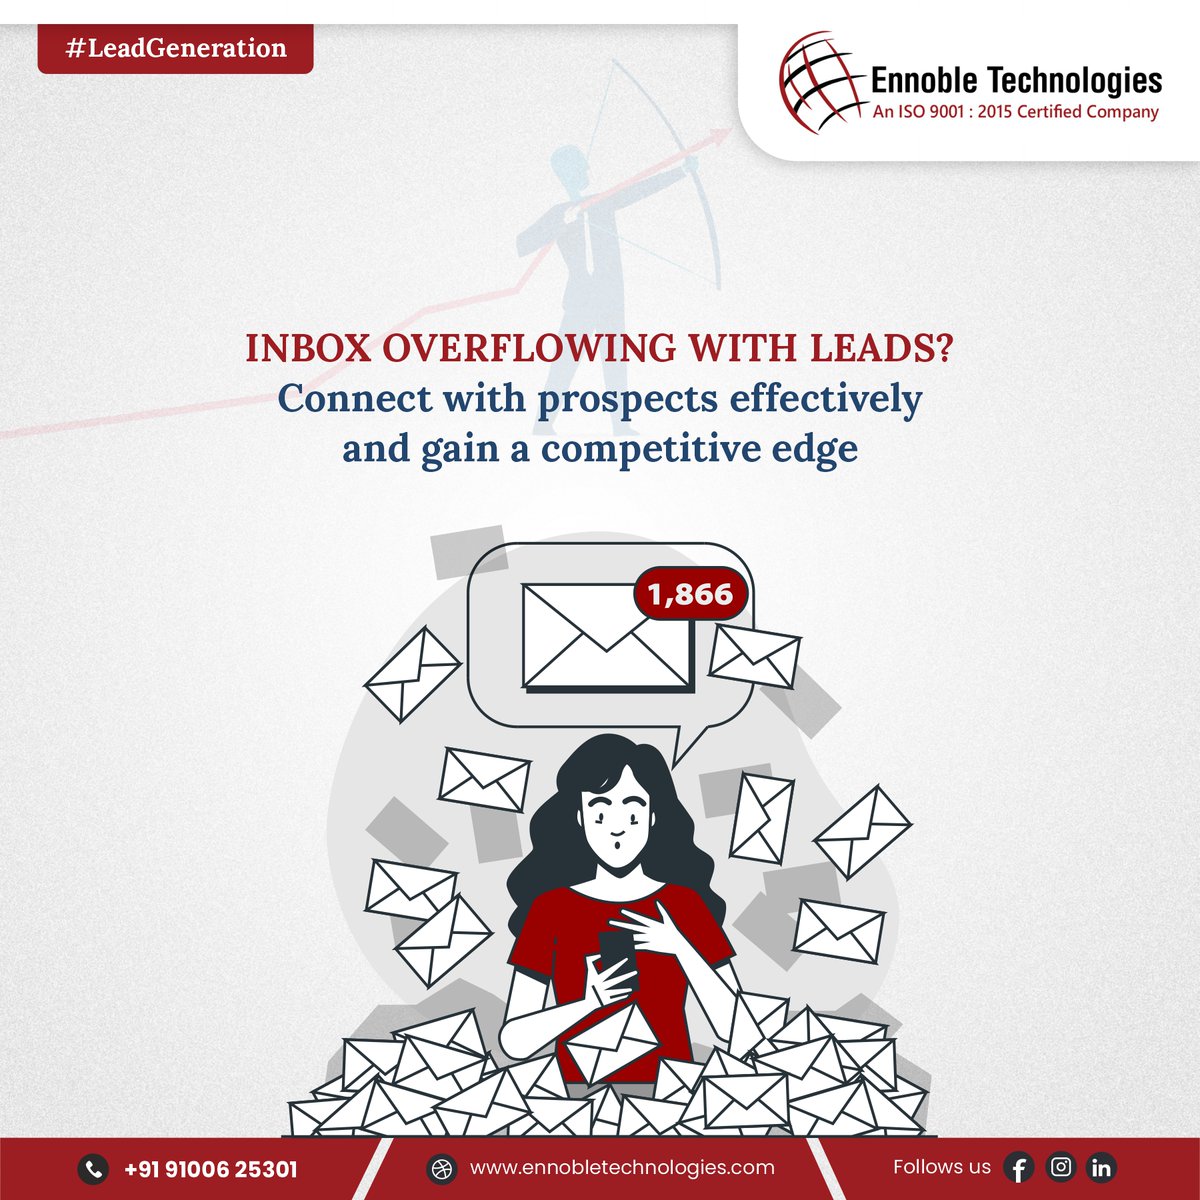 Inbox overflowing with leads?

💻Streamline your marketing efforts with Ennoble Technologies' #EmailCampaign solutions. Reach out to start converting leads!✉️

☎️Tel: +91-9100625301
📧Email us: info@ennobletechnologies.com

#EmailMarketing #LeadGeneration #EnnobleTechnologies